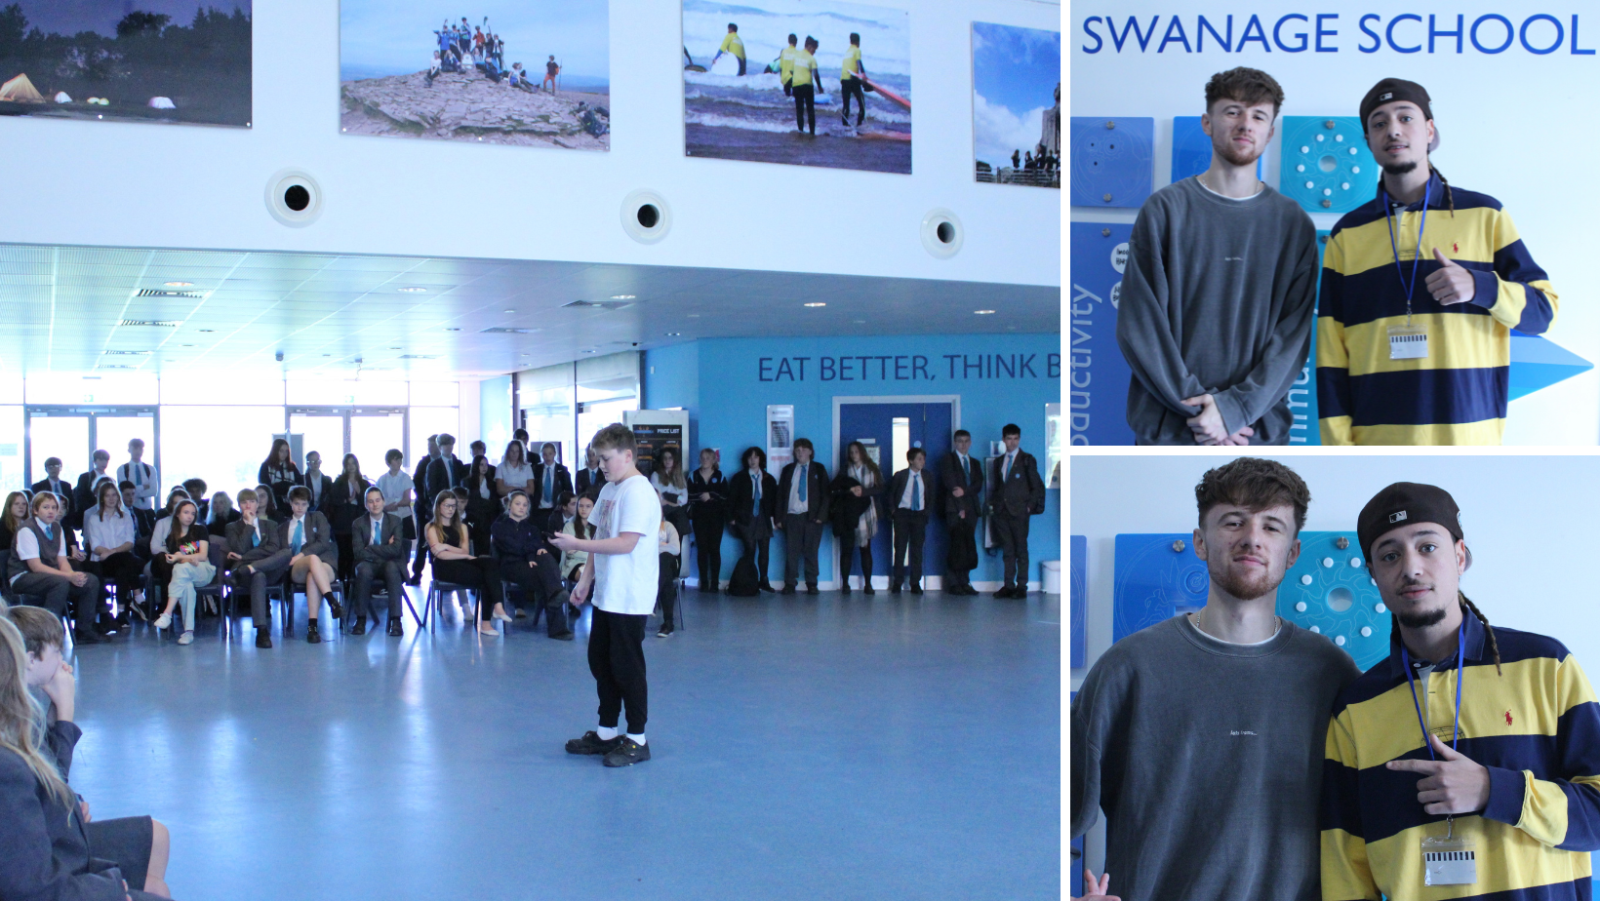 Student performs a rap at The Swanage School